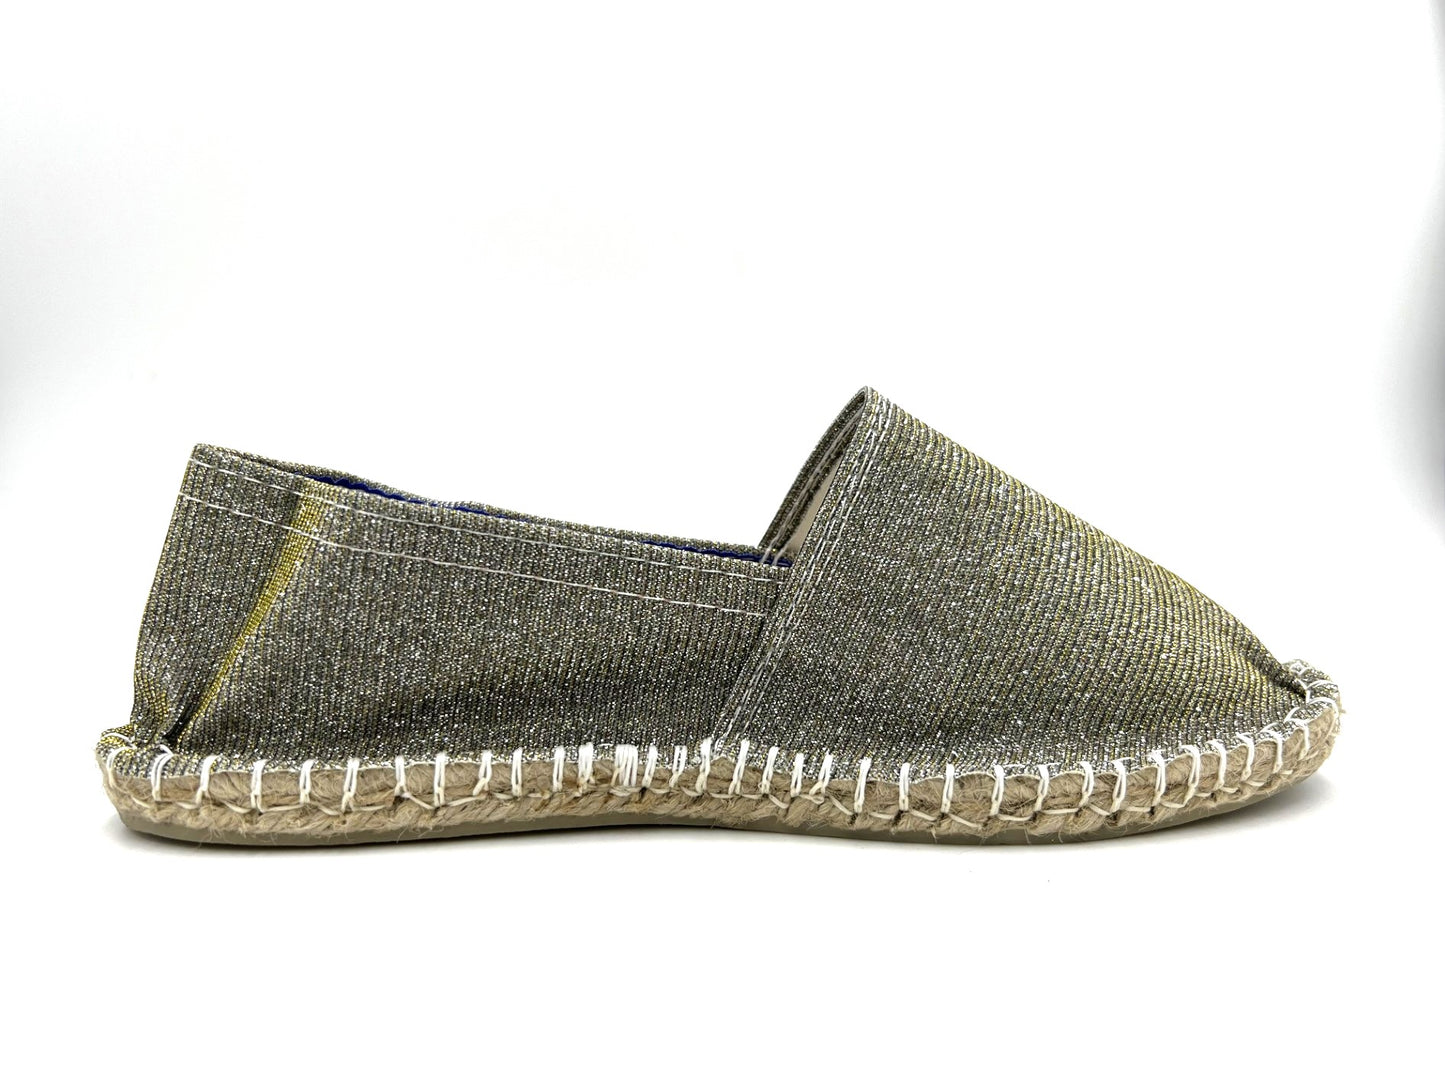 Silver/Gold Sparkly Espadrille